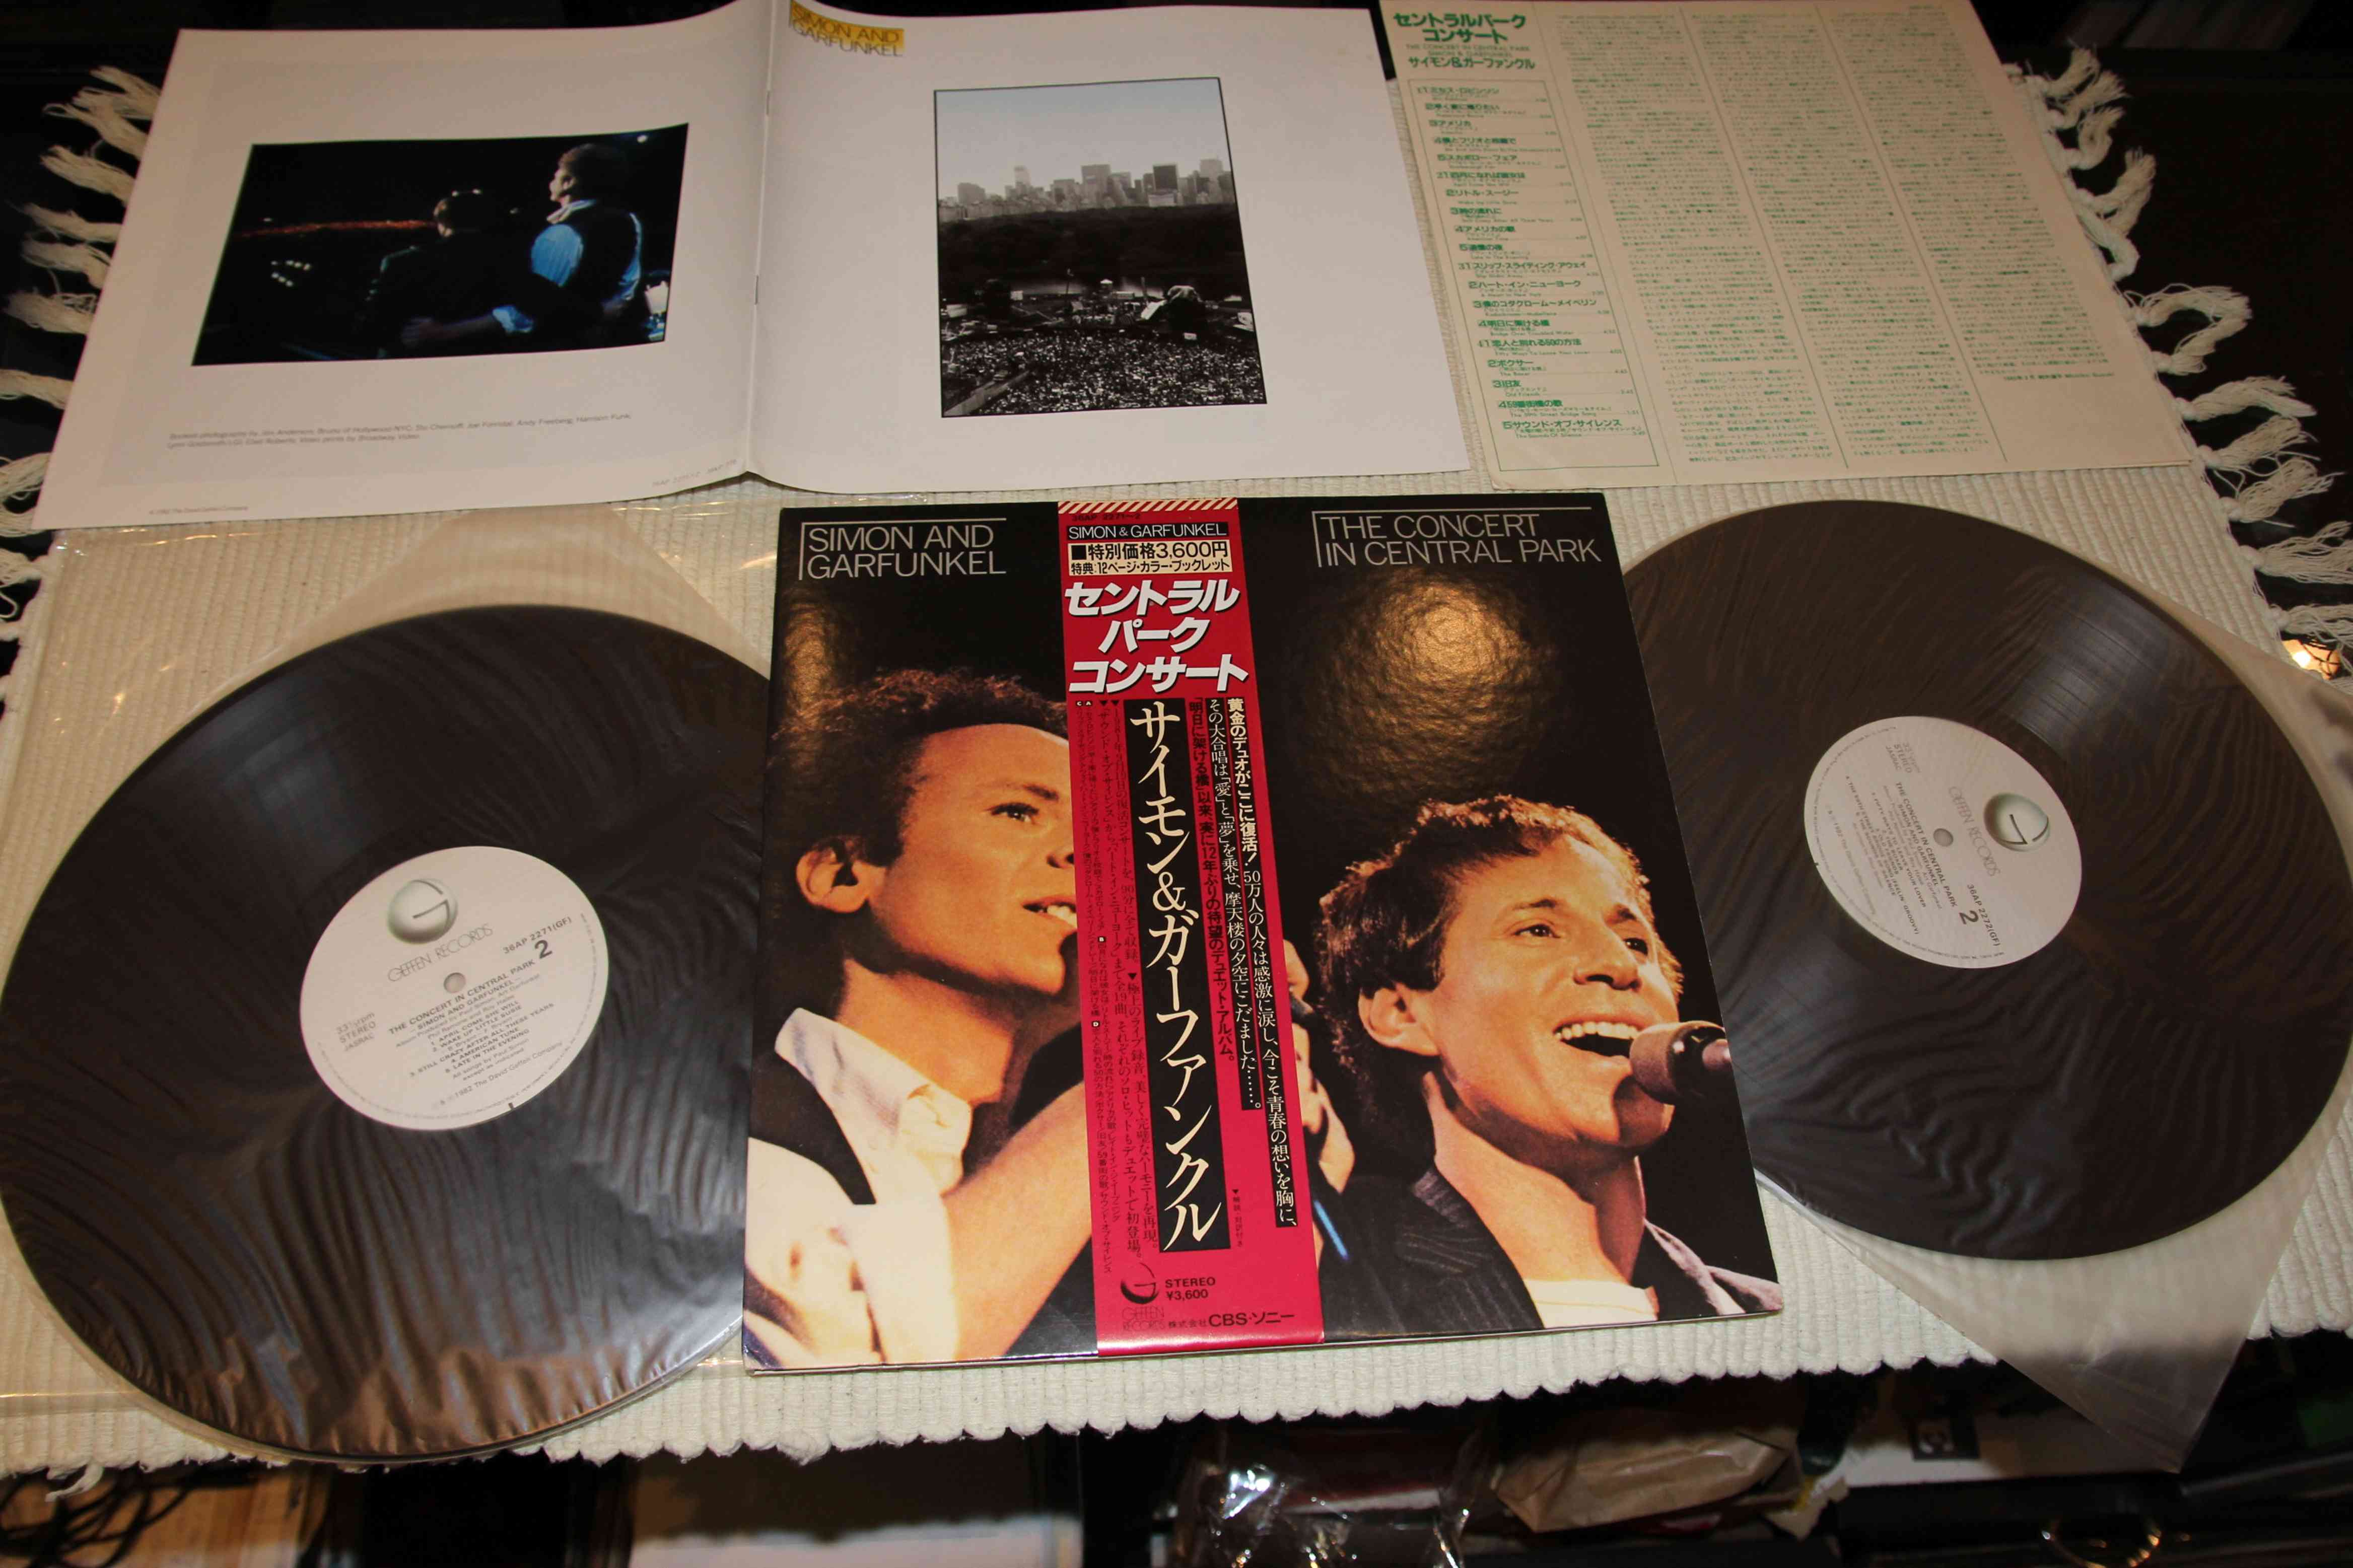 SIMON AND GARFUNKEL - THE CONCERT IN CENTRAL PARK - JAPAN